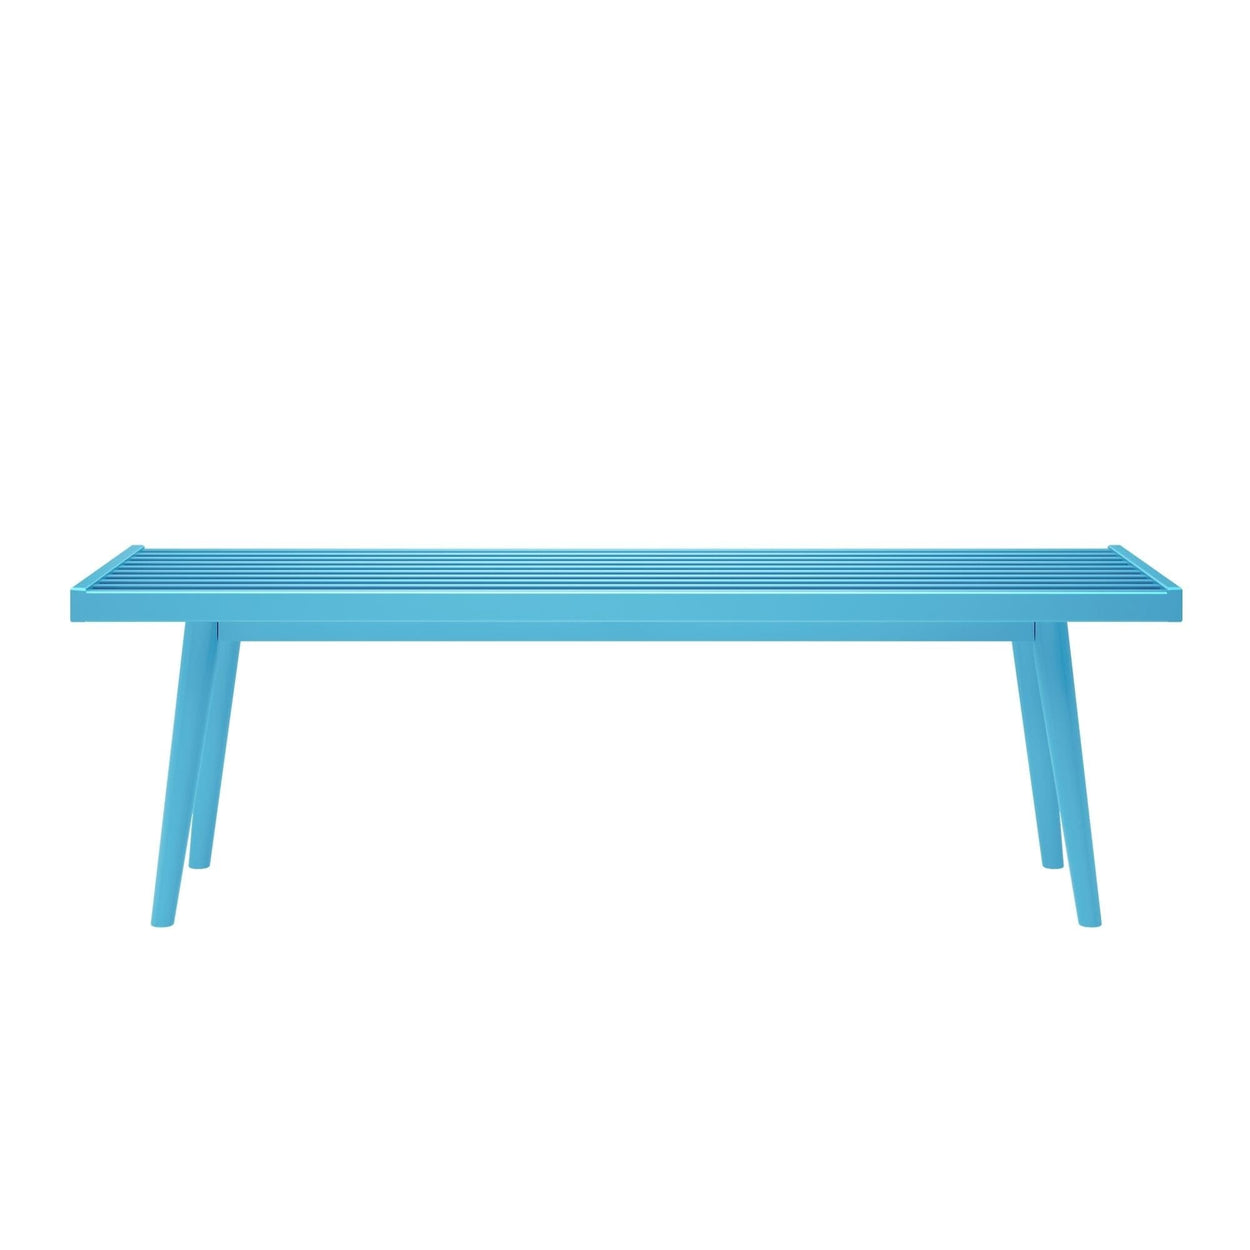 184302-105 : Accessories Mid-Century Modern Full-Size Bench, Teal